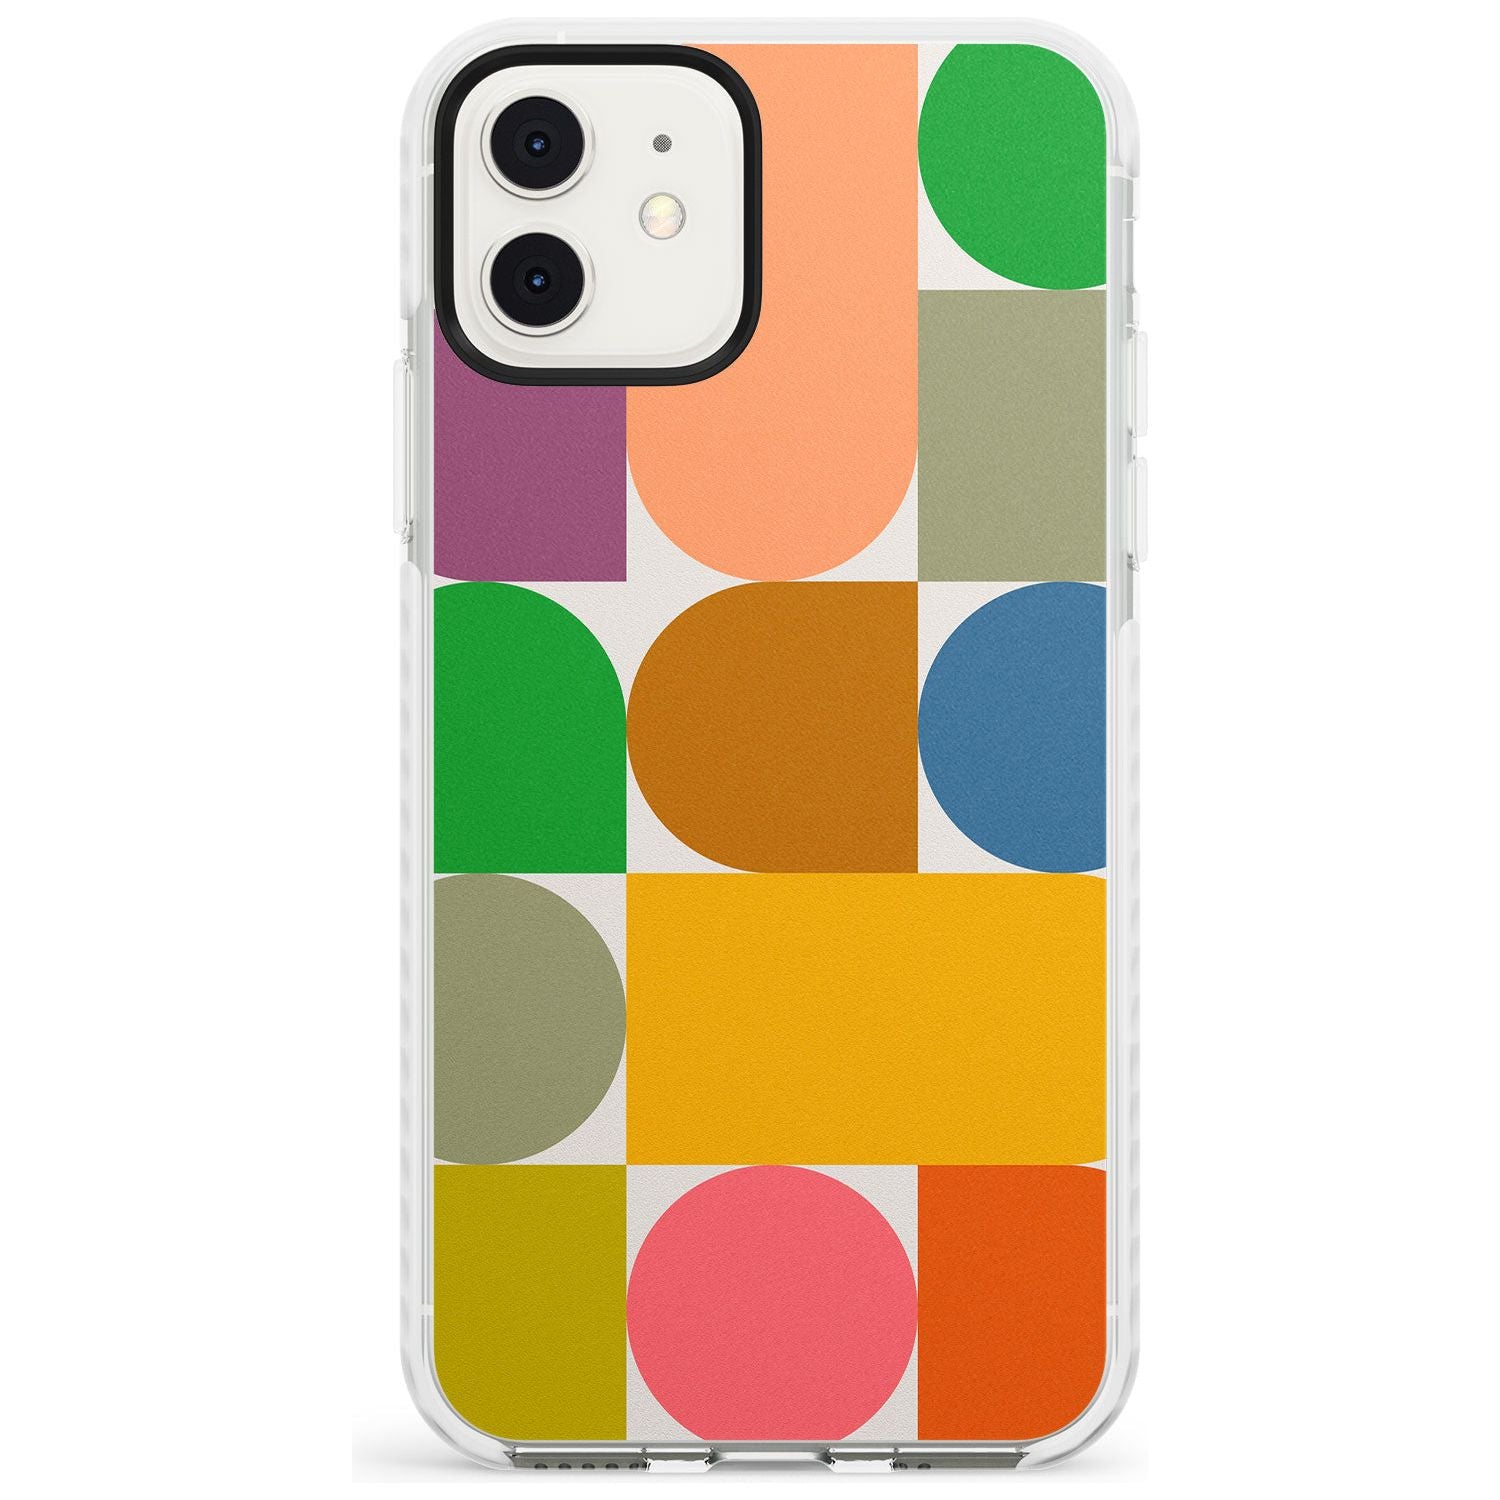 Abstract Retro Shapes: Rainbow Mix Slim TPU Phone Case for iPhone 11